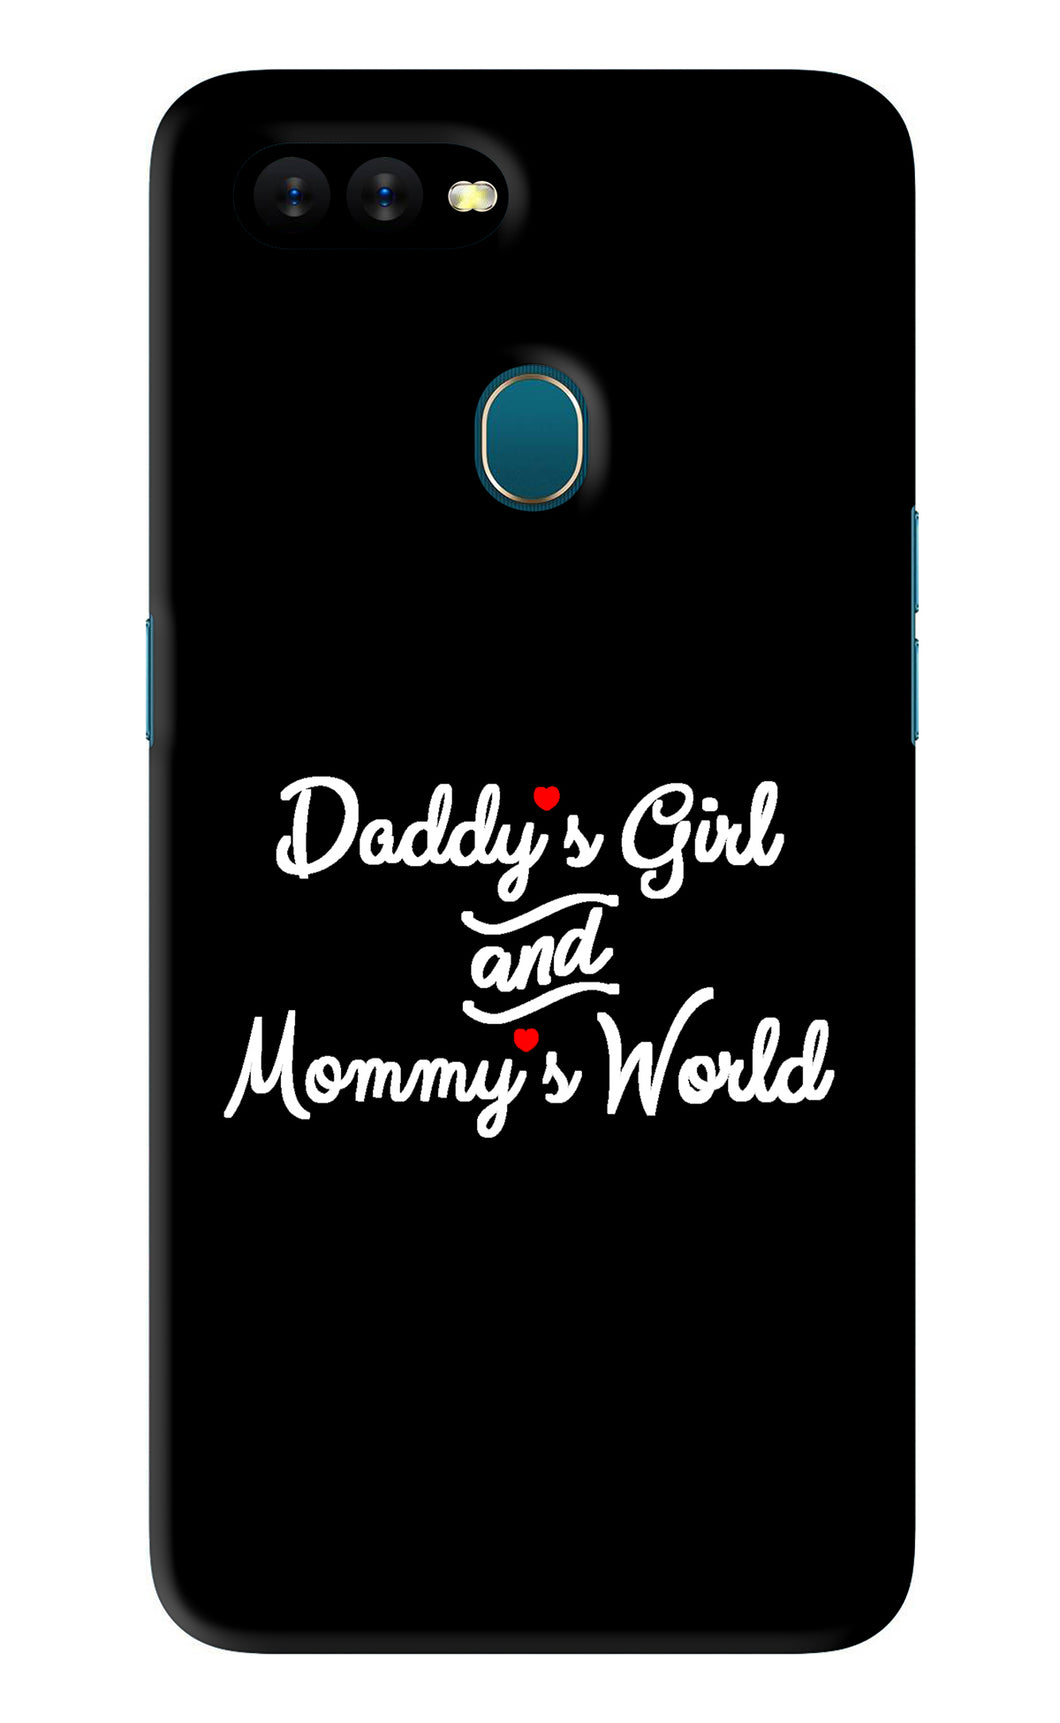 Daddy's Girl and Mommy's World Oppo A7 Back Skin Wrap